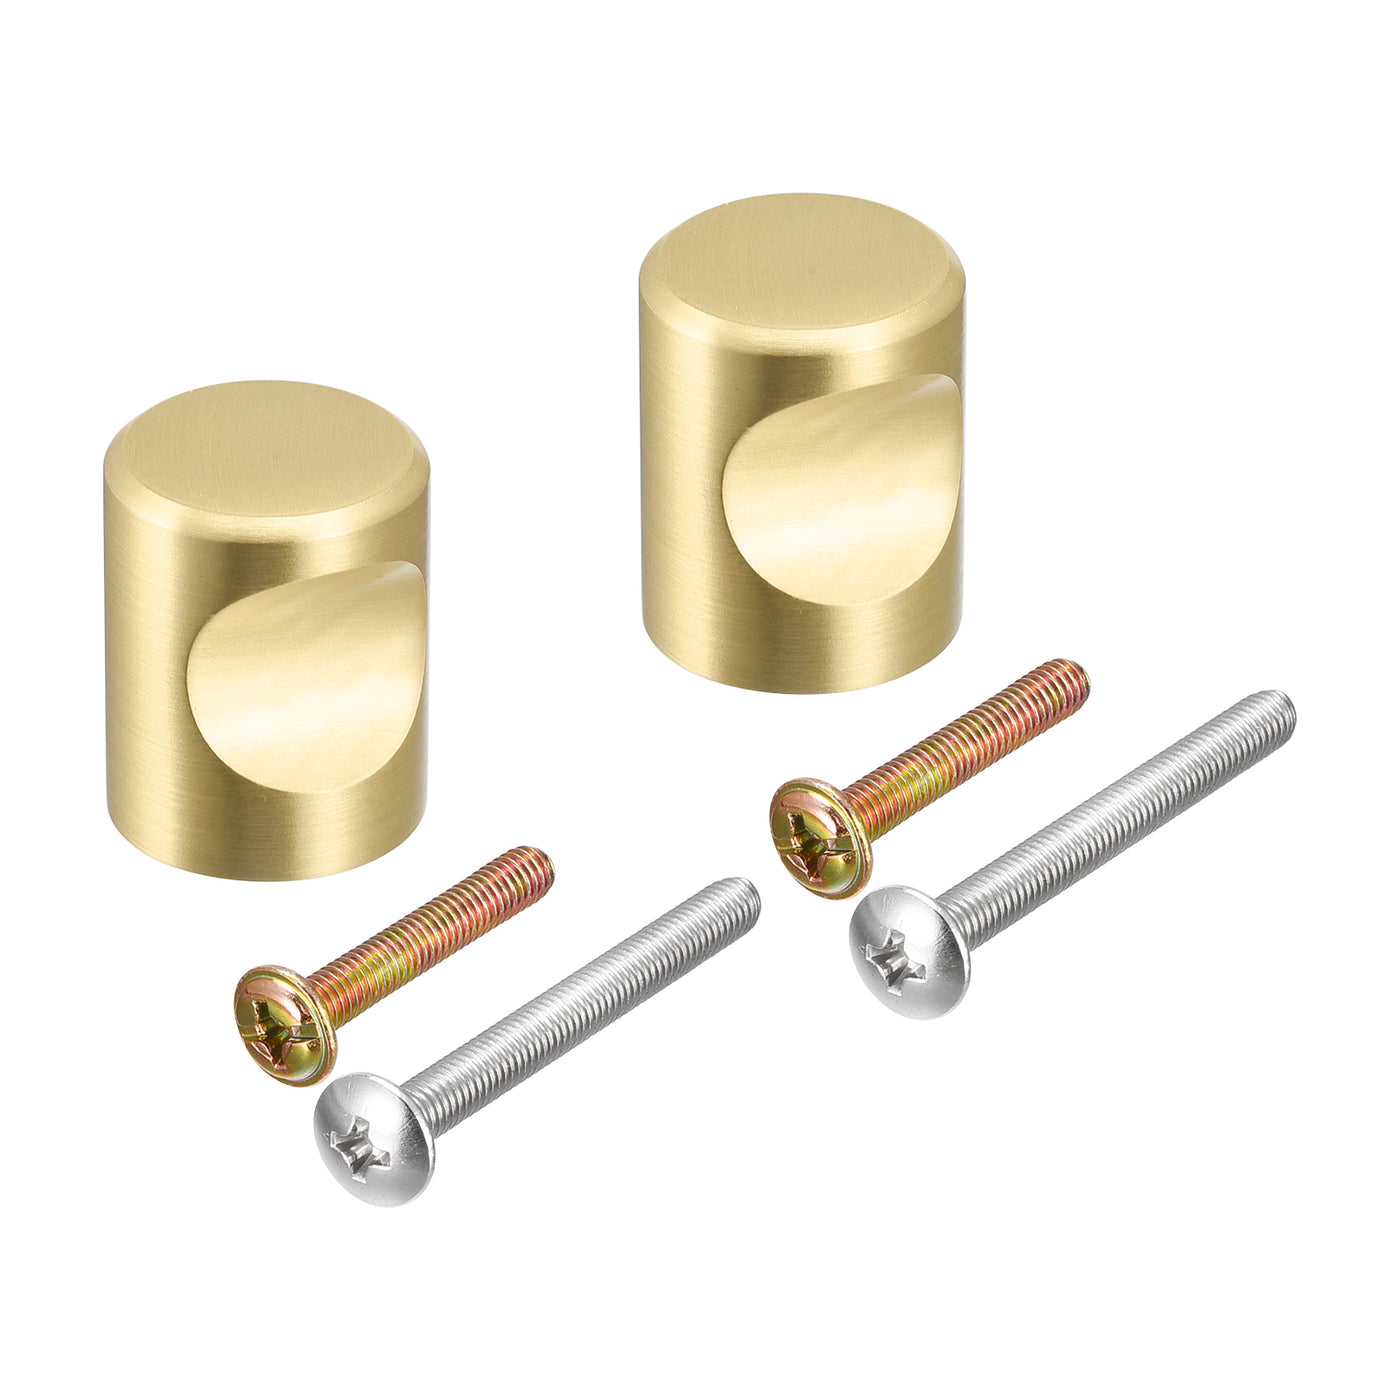 uxcell Uxcell 20x25mm Drawer Knobs, 2pcs Brass Wardrobe Pull Handles, Gold Tone